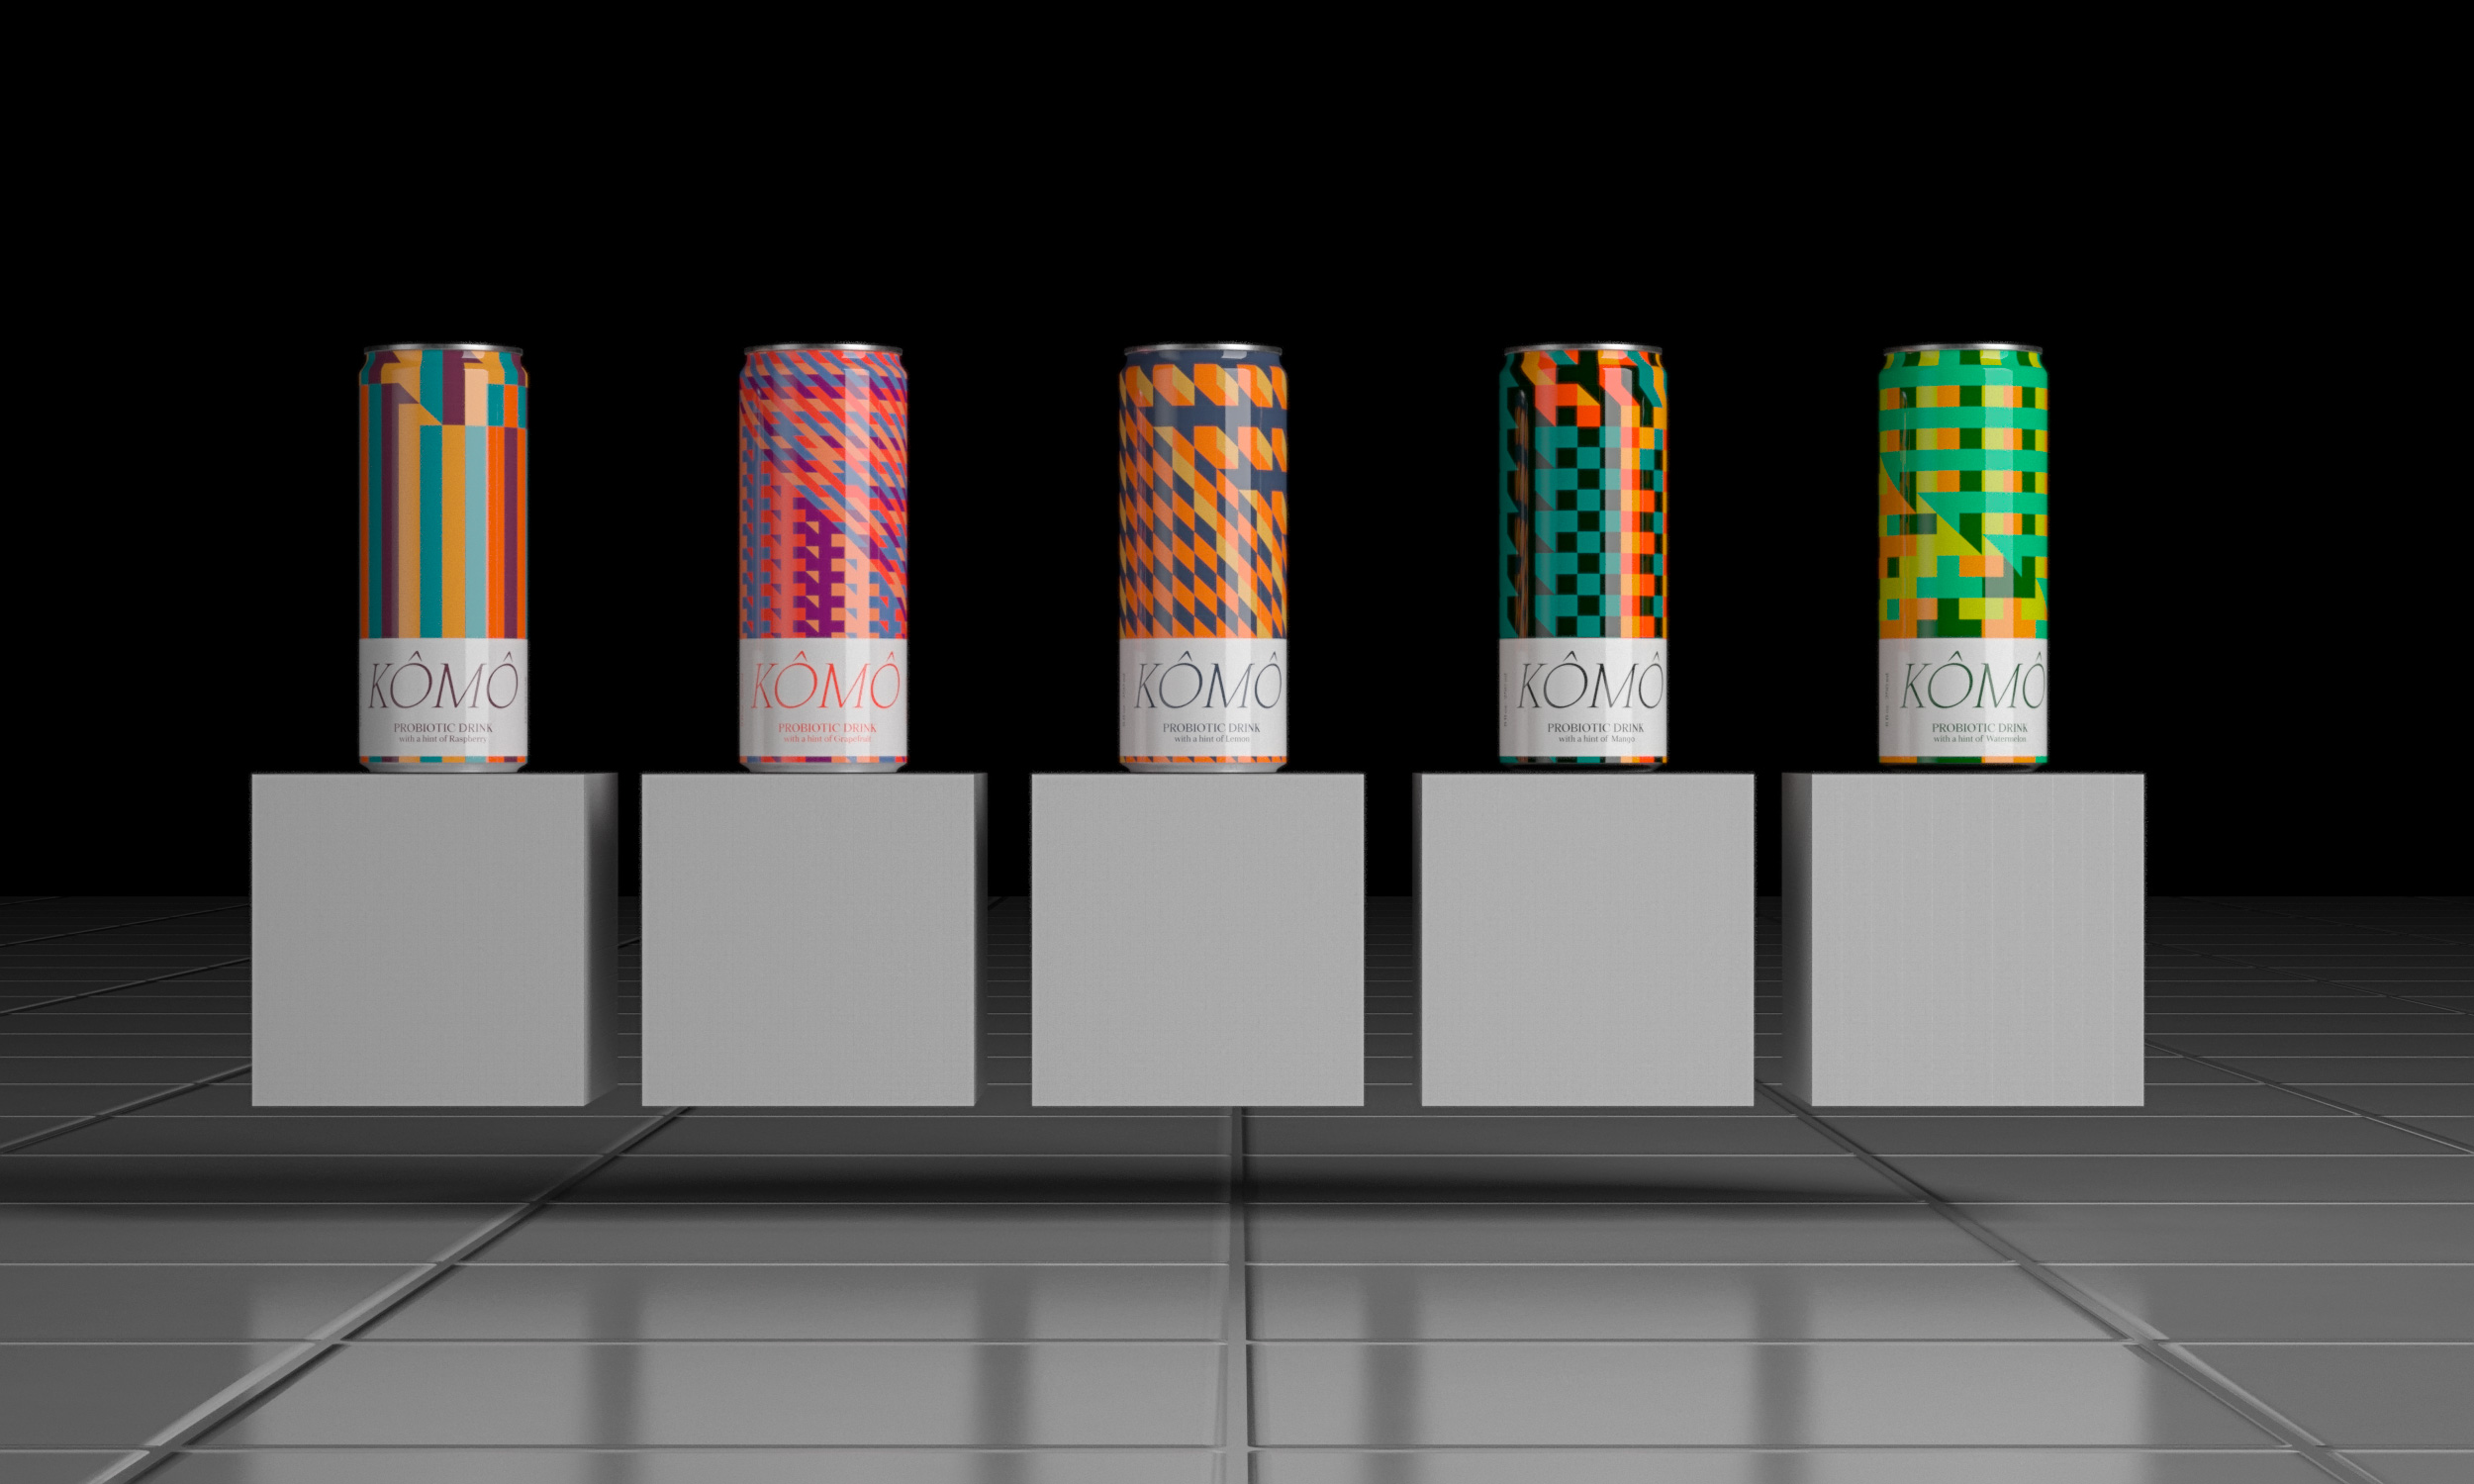 Five Komo soda cans designed by artificial intelligence